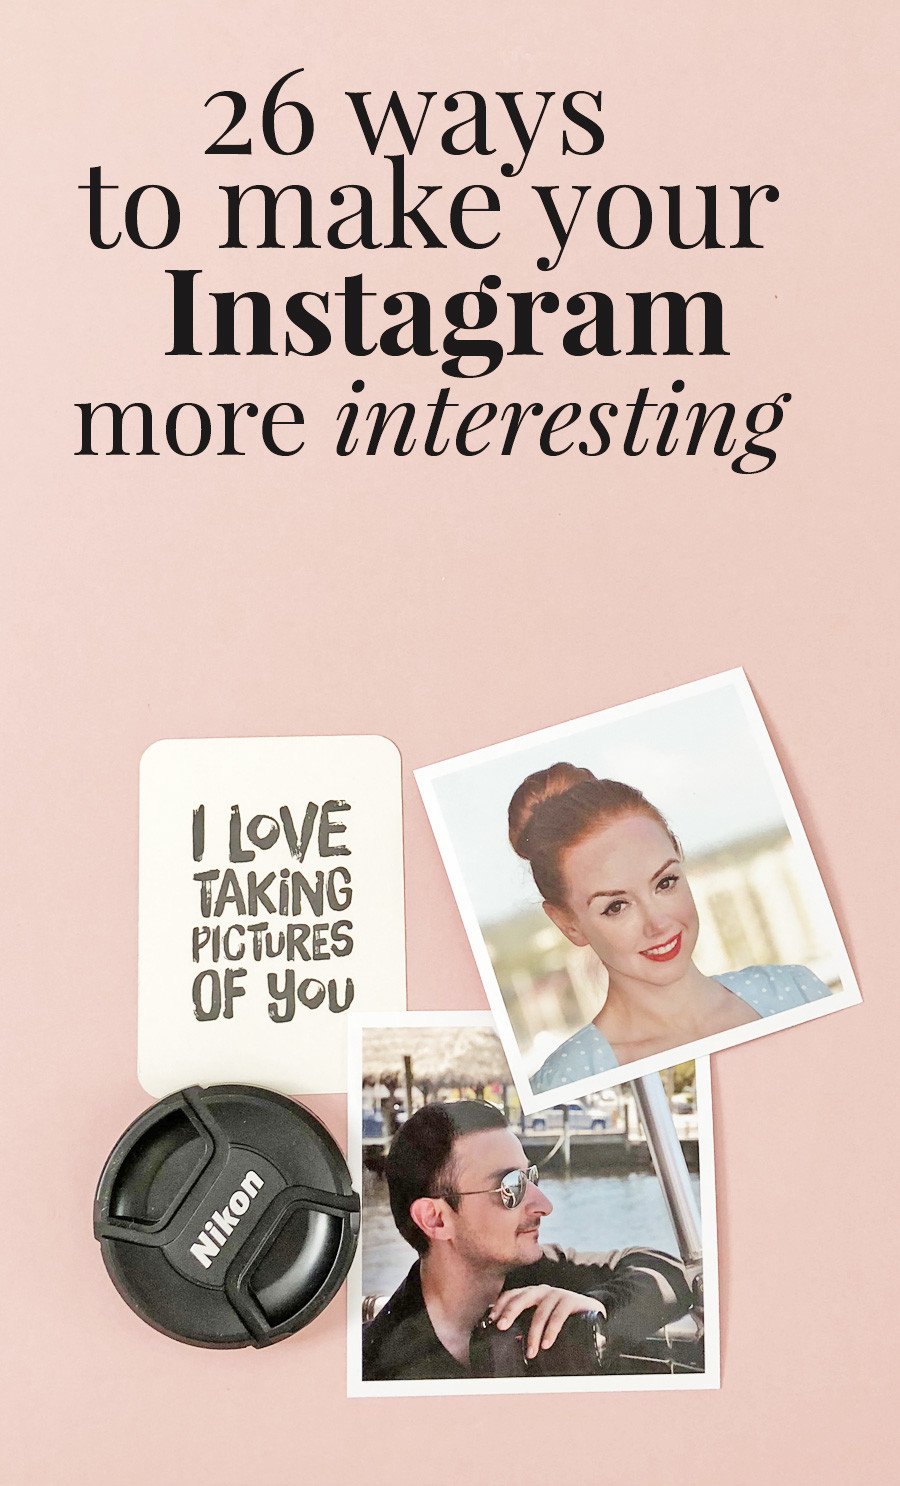 26 ways to make your Instagram more interesting